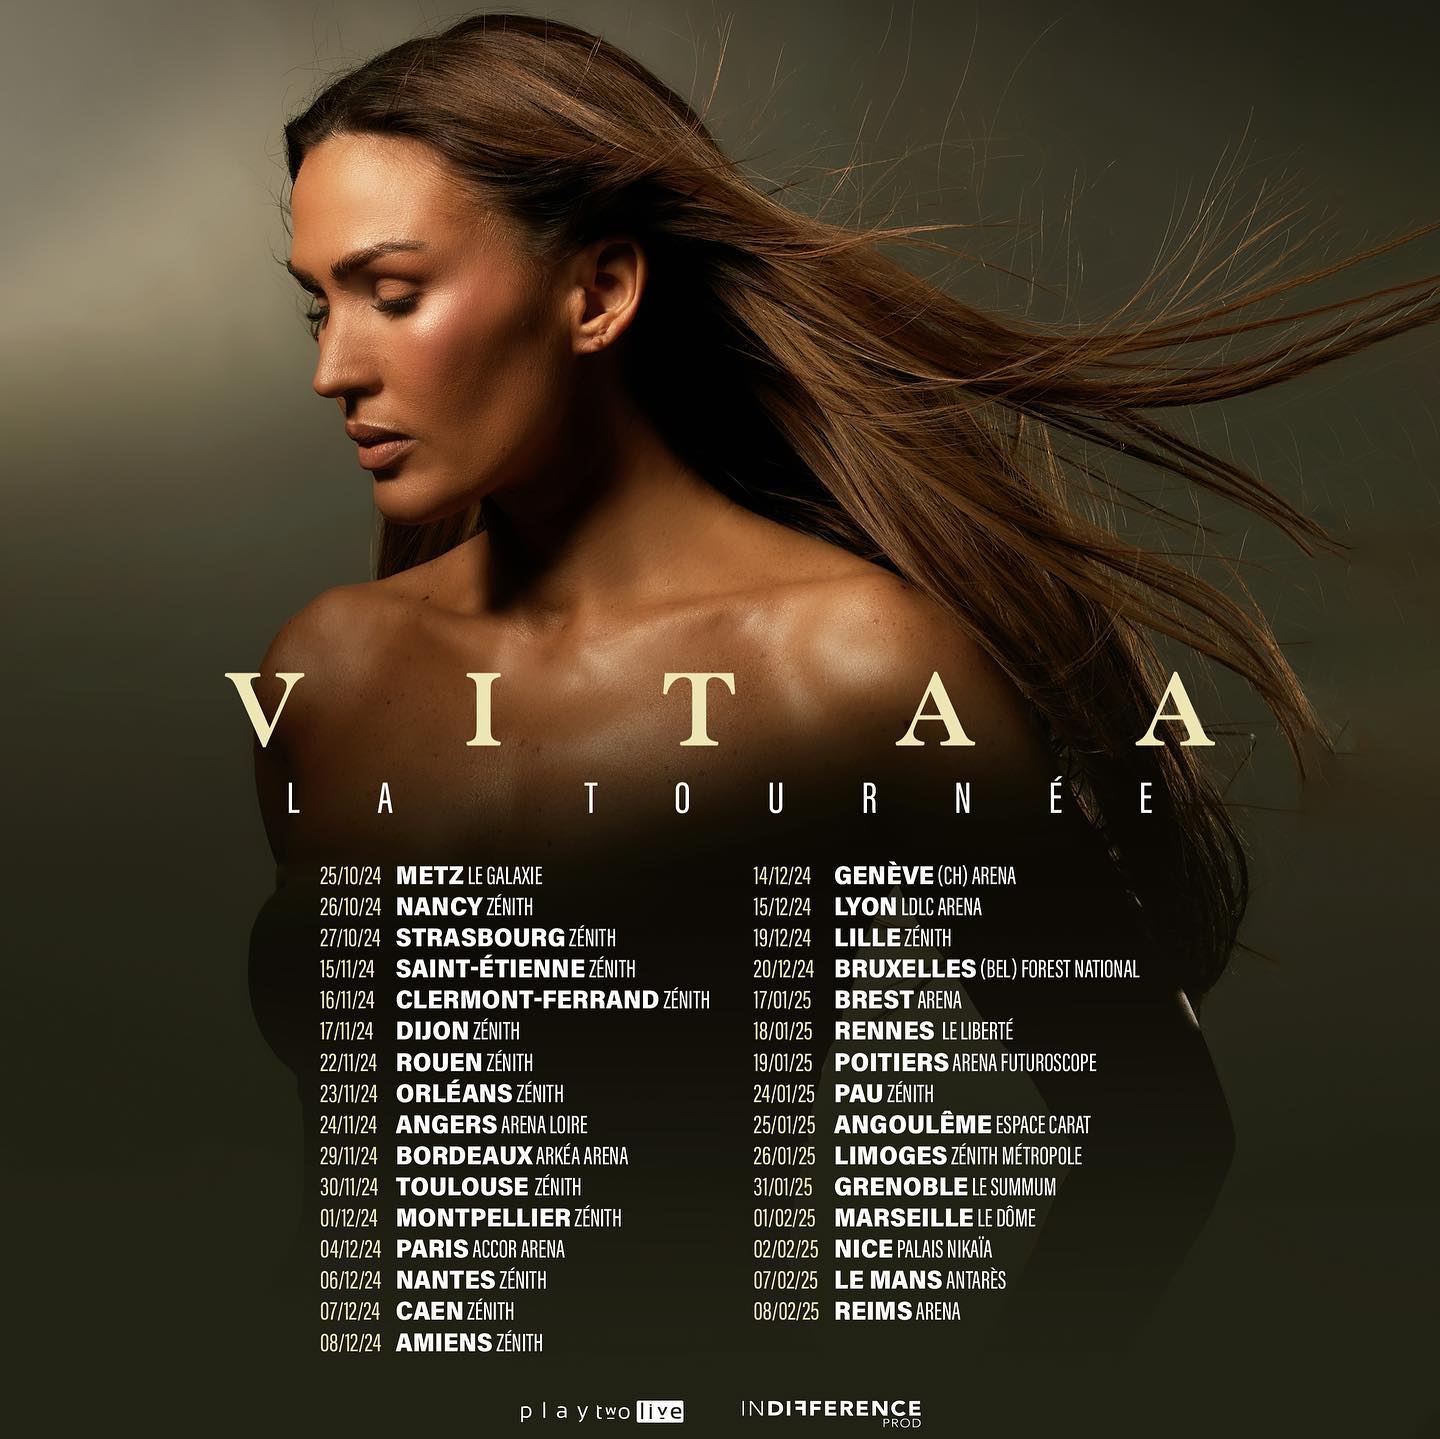 Vitaa in der Espace Carat Angouleme Tickets